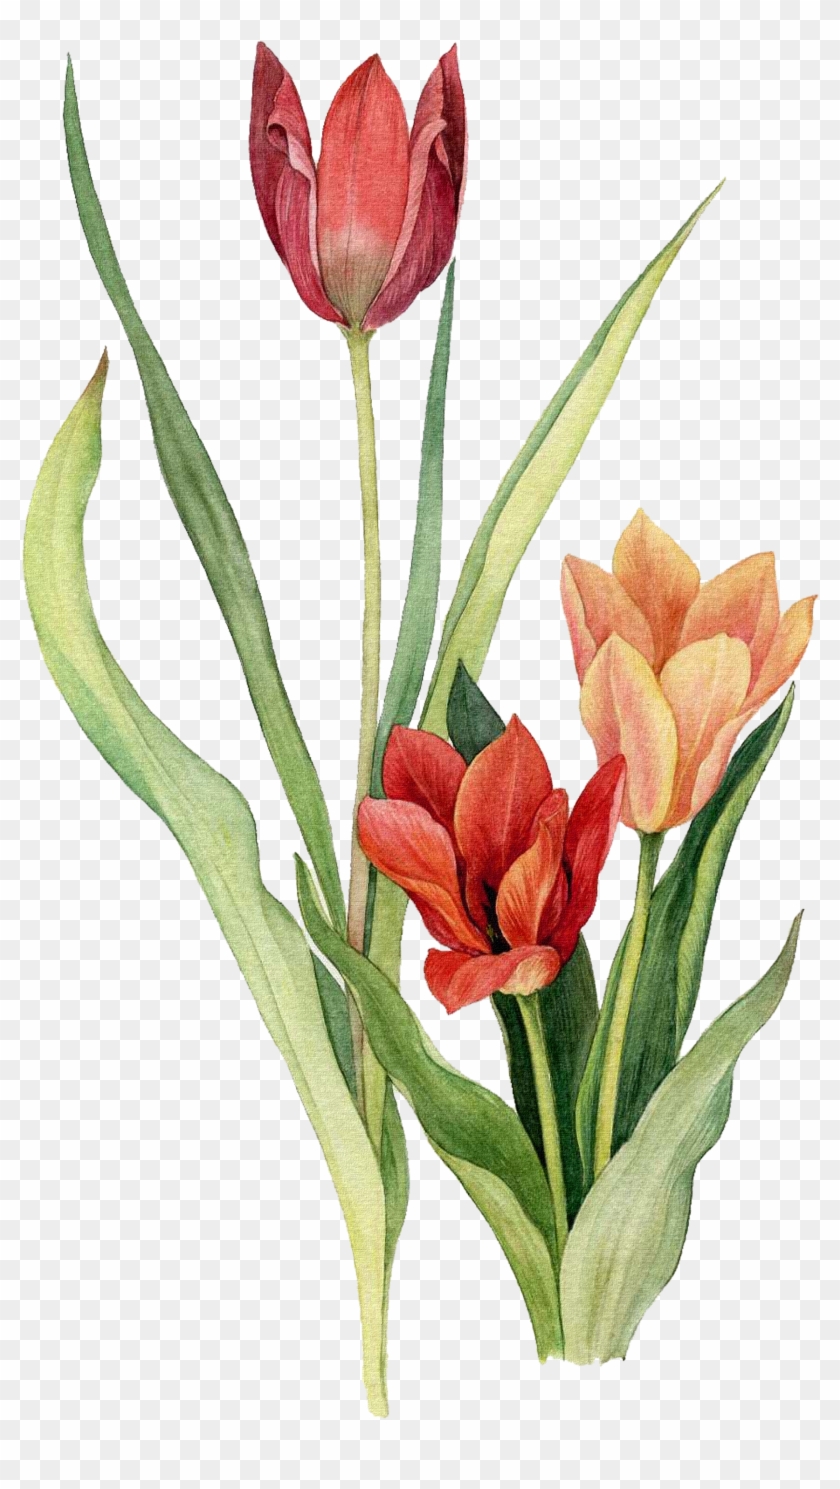 Tulip Flower Watercolor Painting Drawing - Drawing Tulips - Free ...